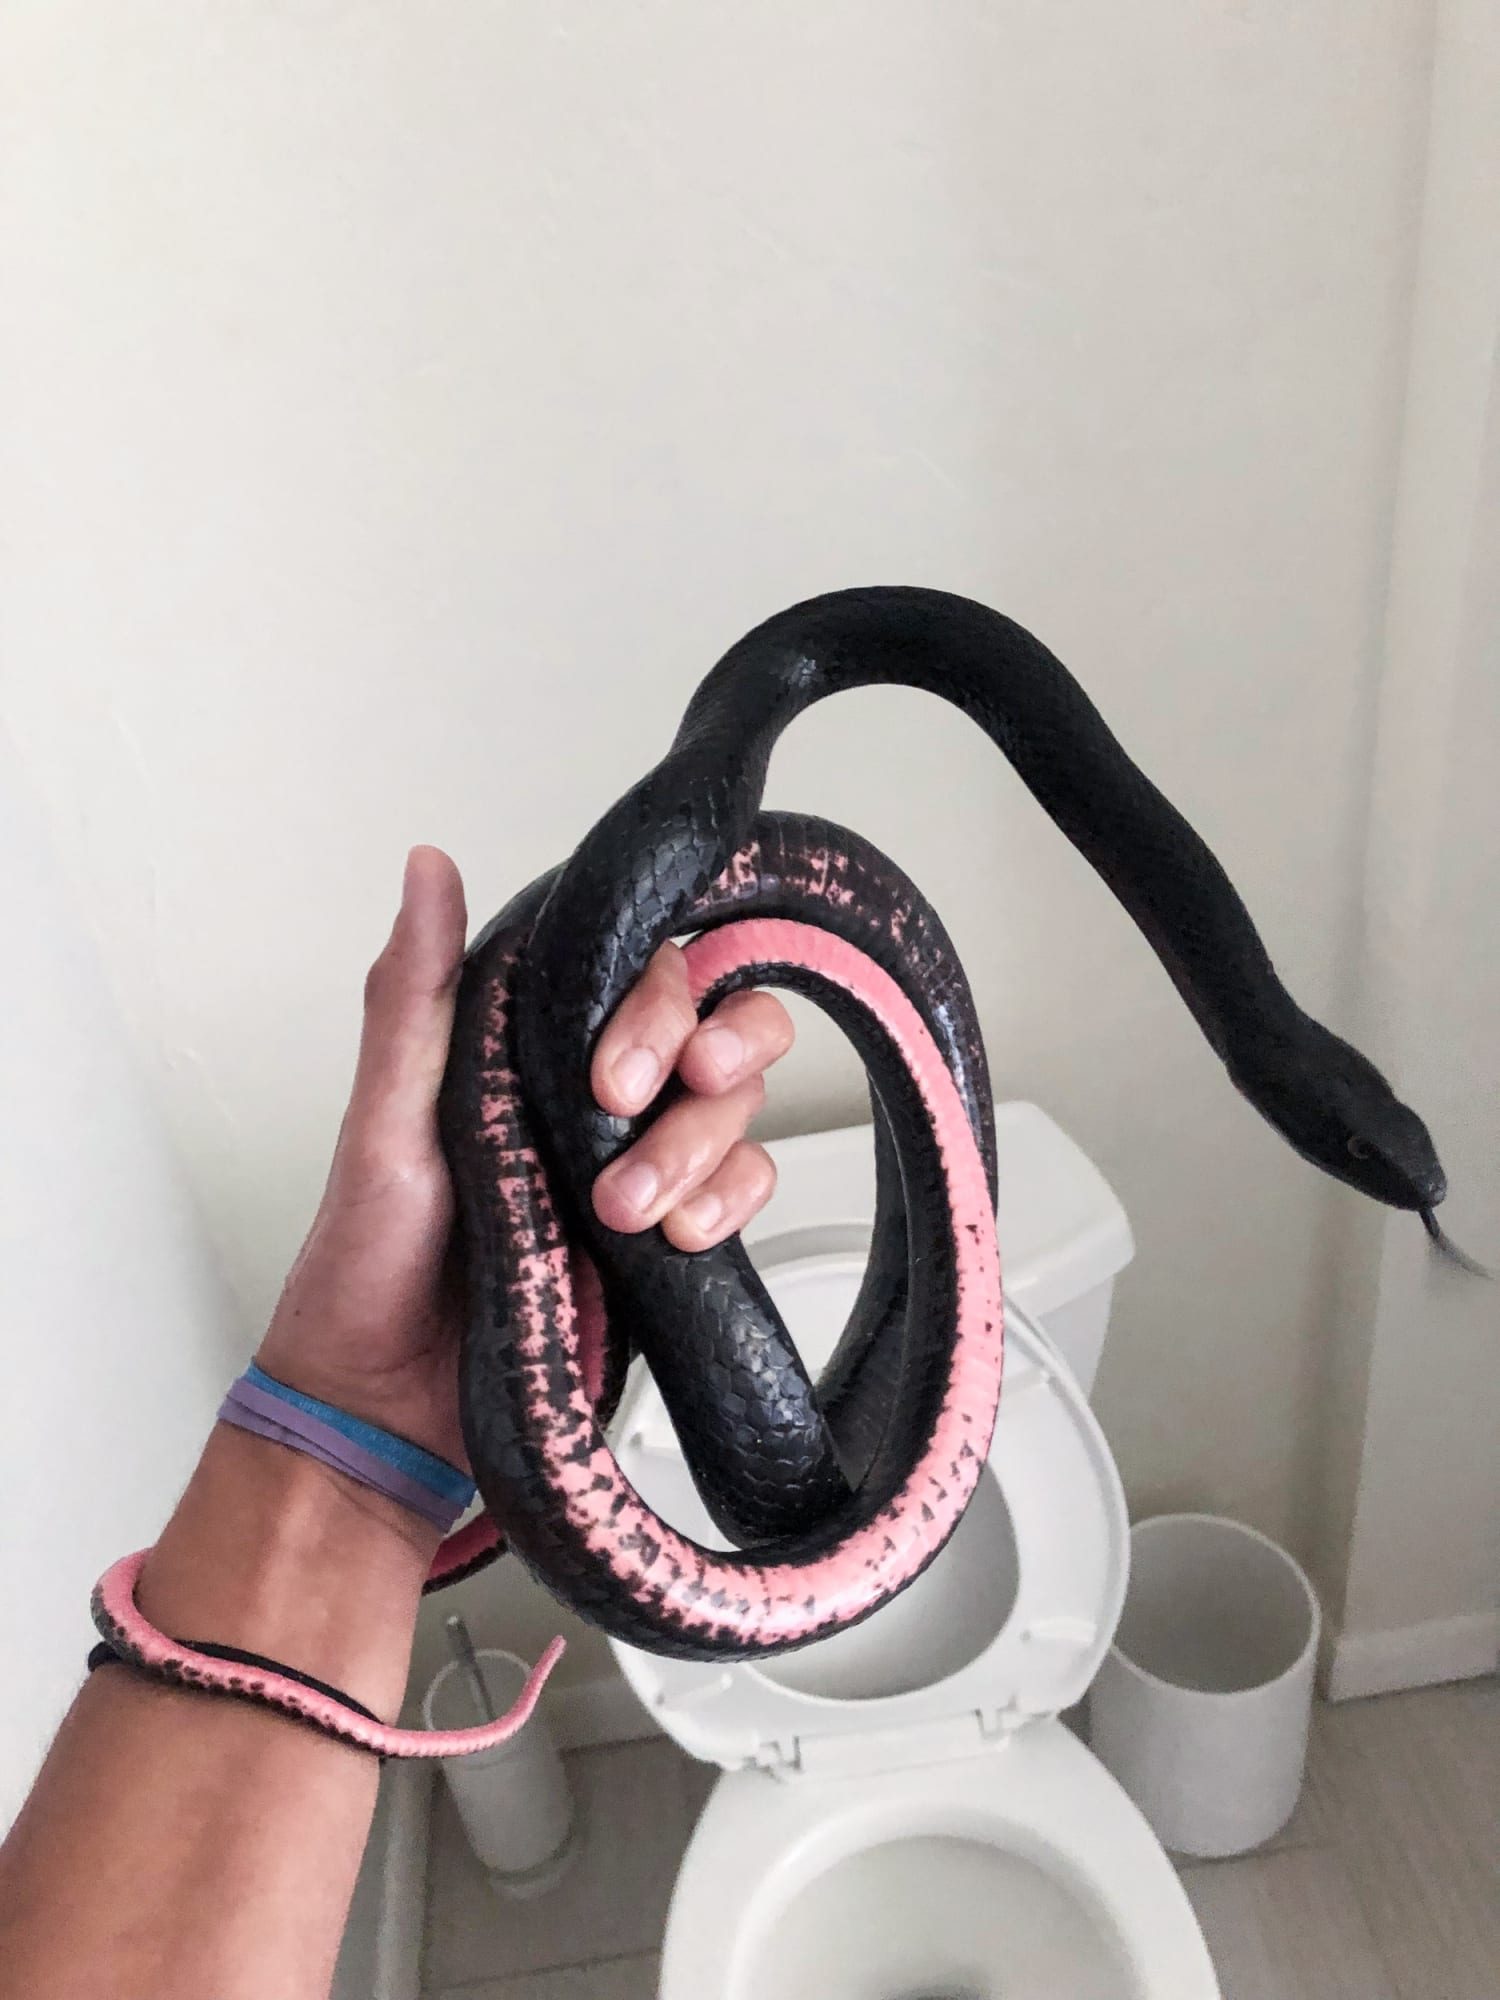 Murfreesboro man sees 6-foot snake in bathroom after getting out of shower